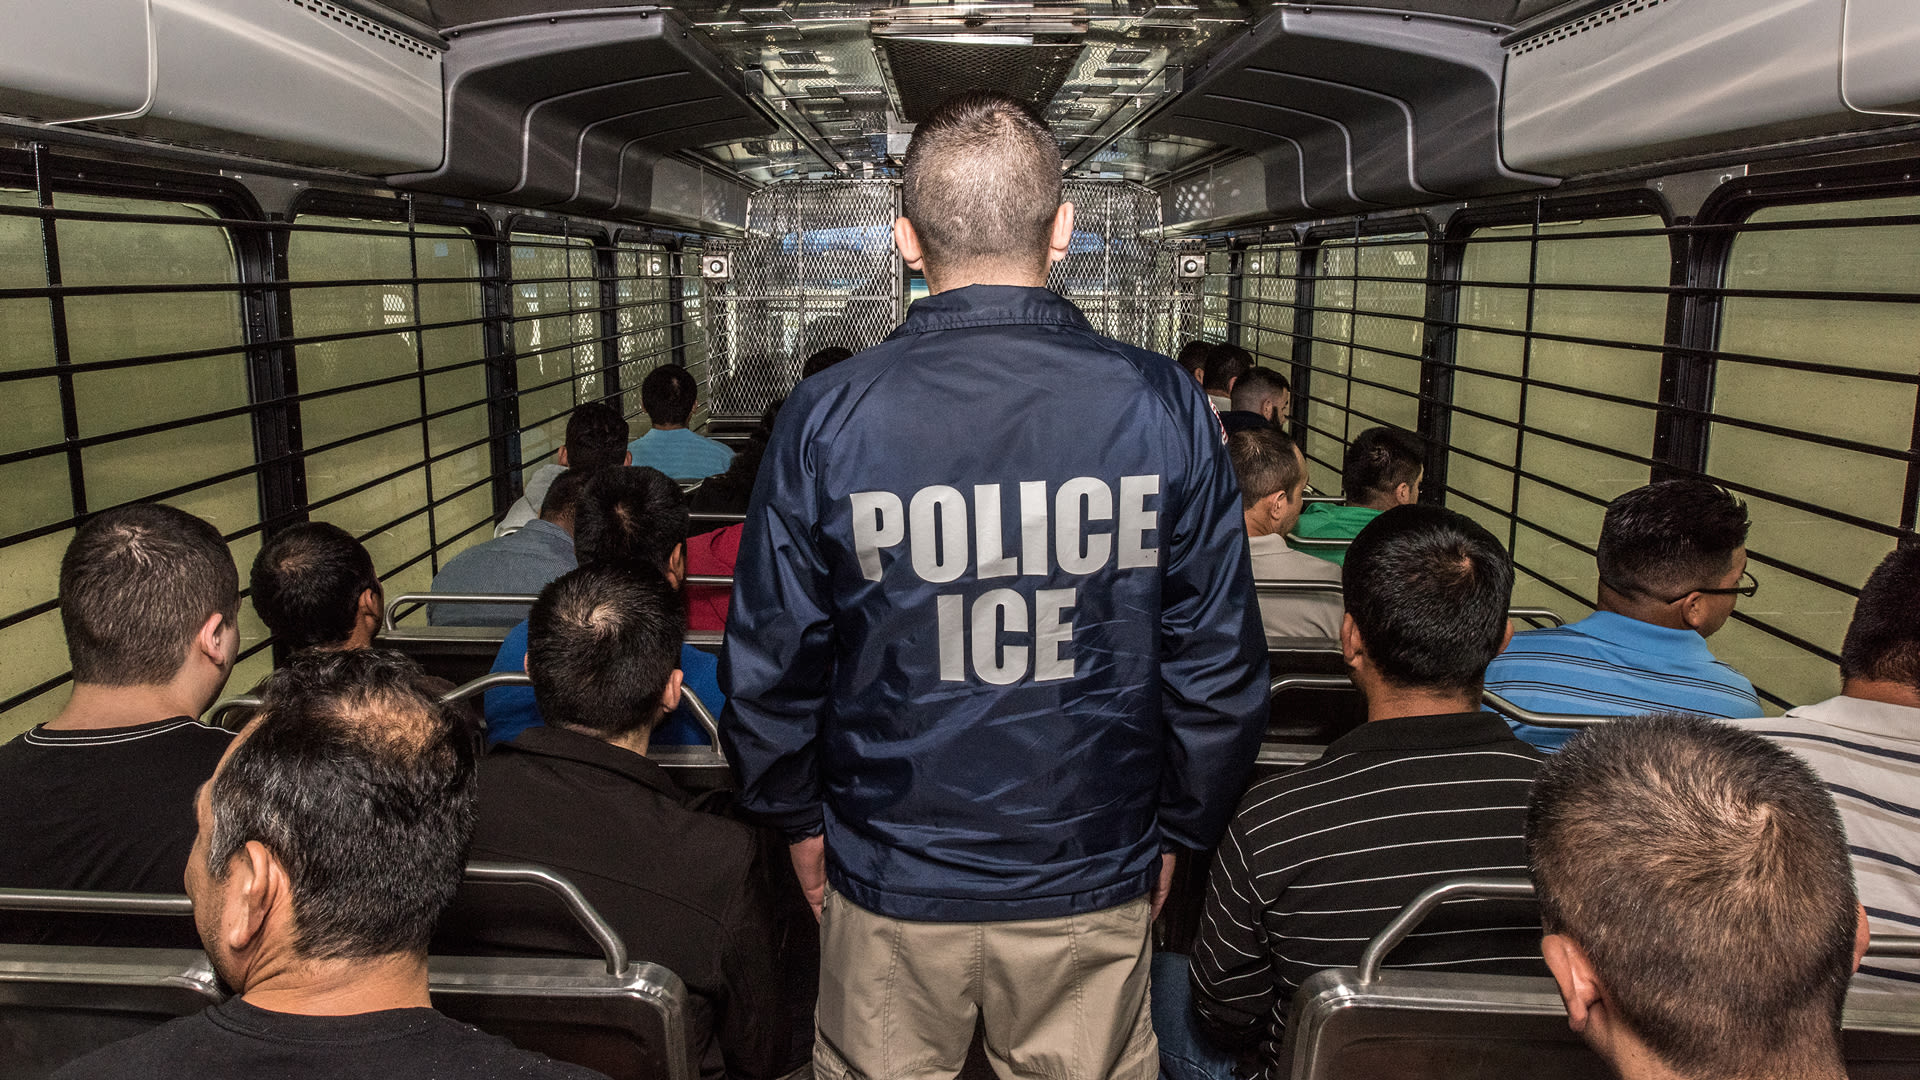 The data firms hired by ICE to hunt people down raise alarm about a hidden surveillance industry